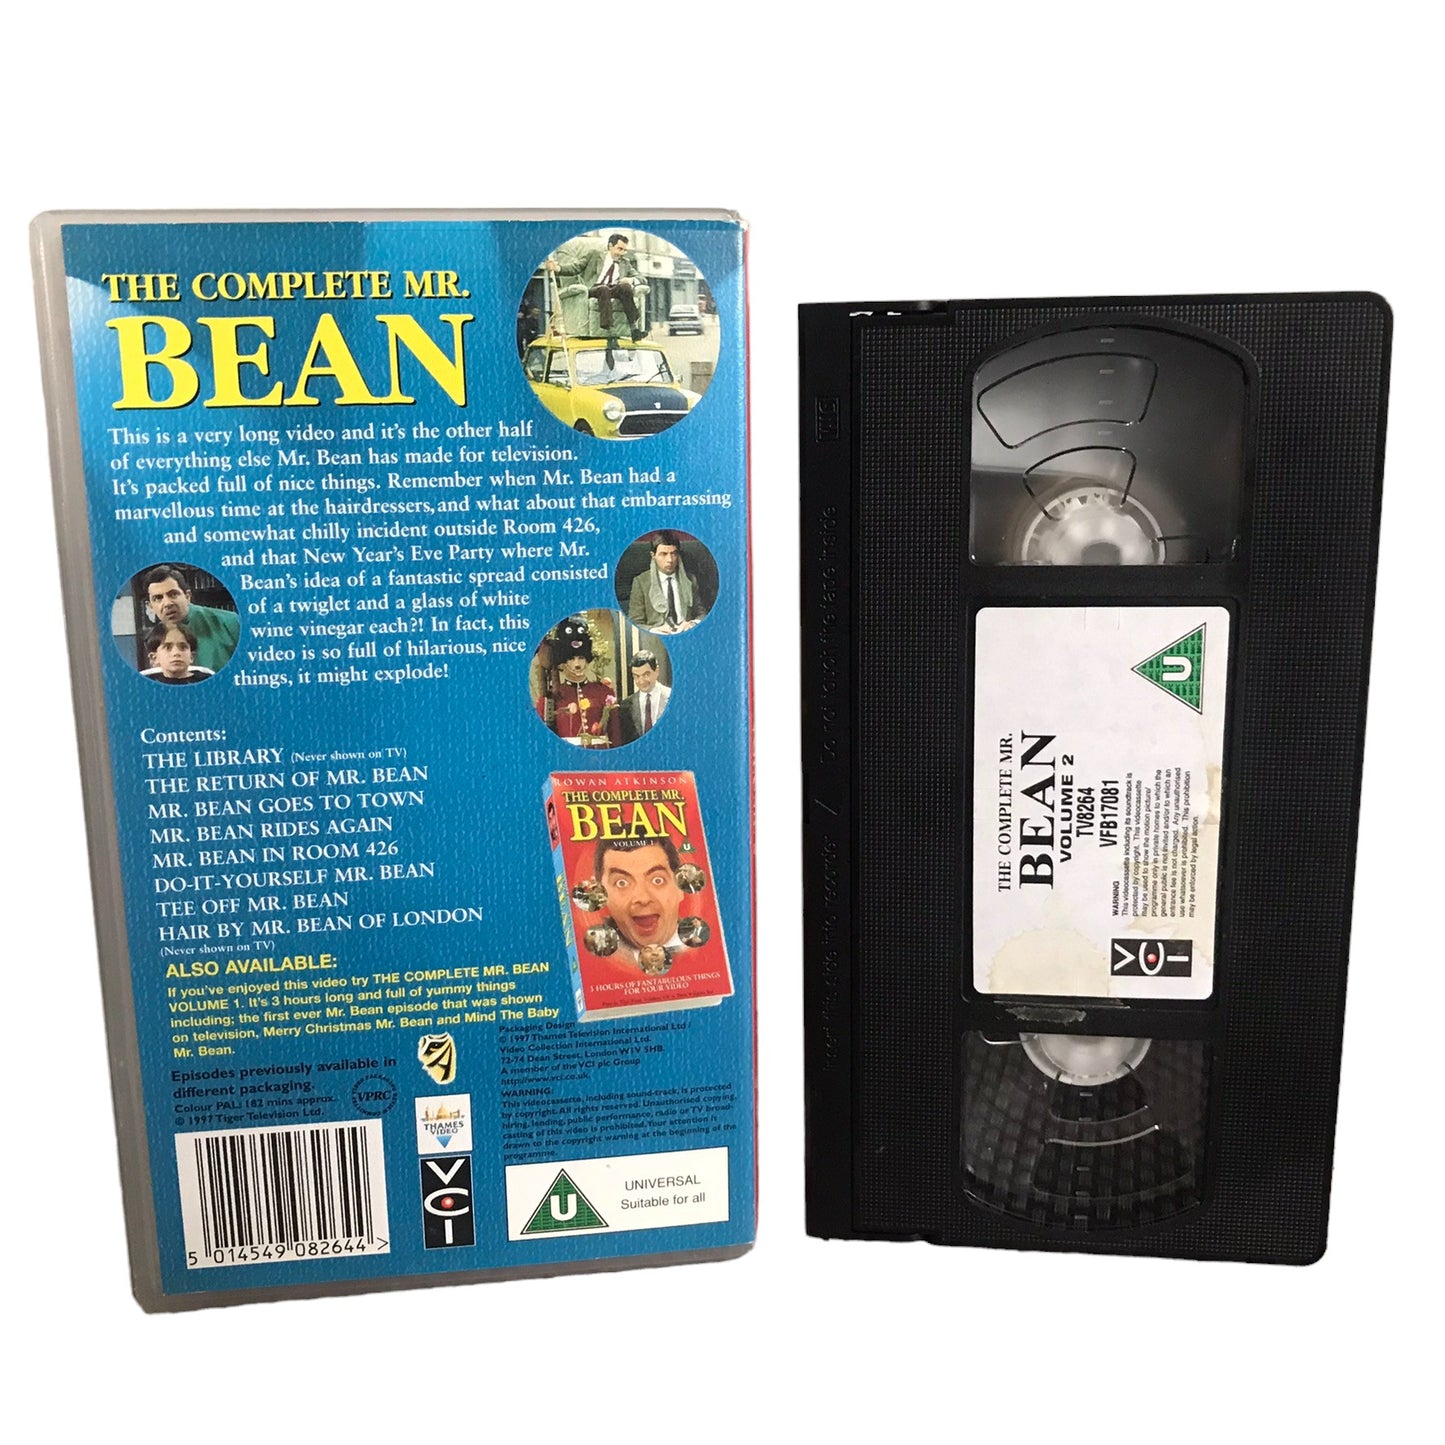 The Complete Mr. Bean - Volume 2 - VCI - Childrens - Pal - VHS-